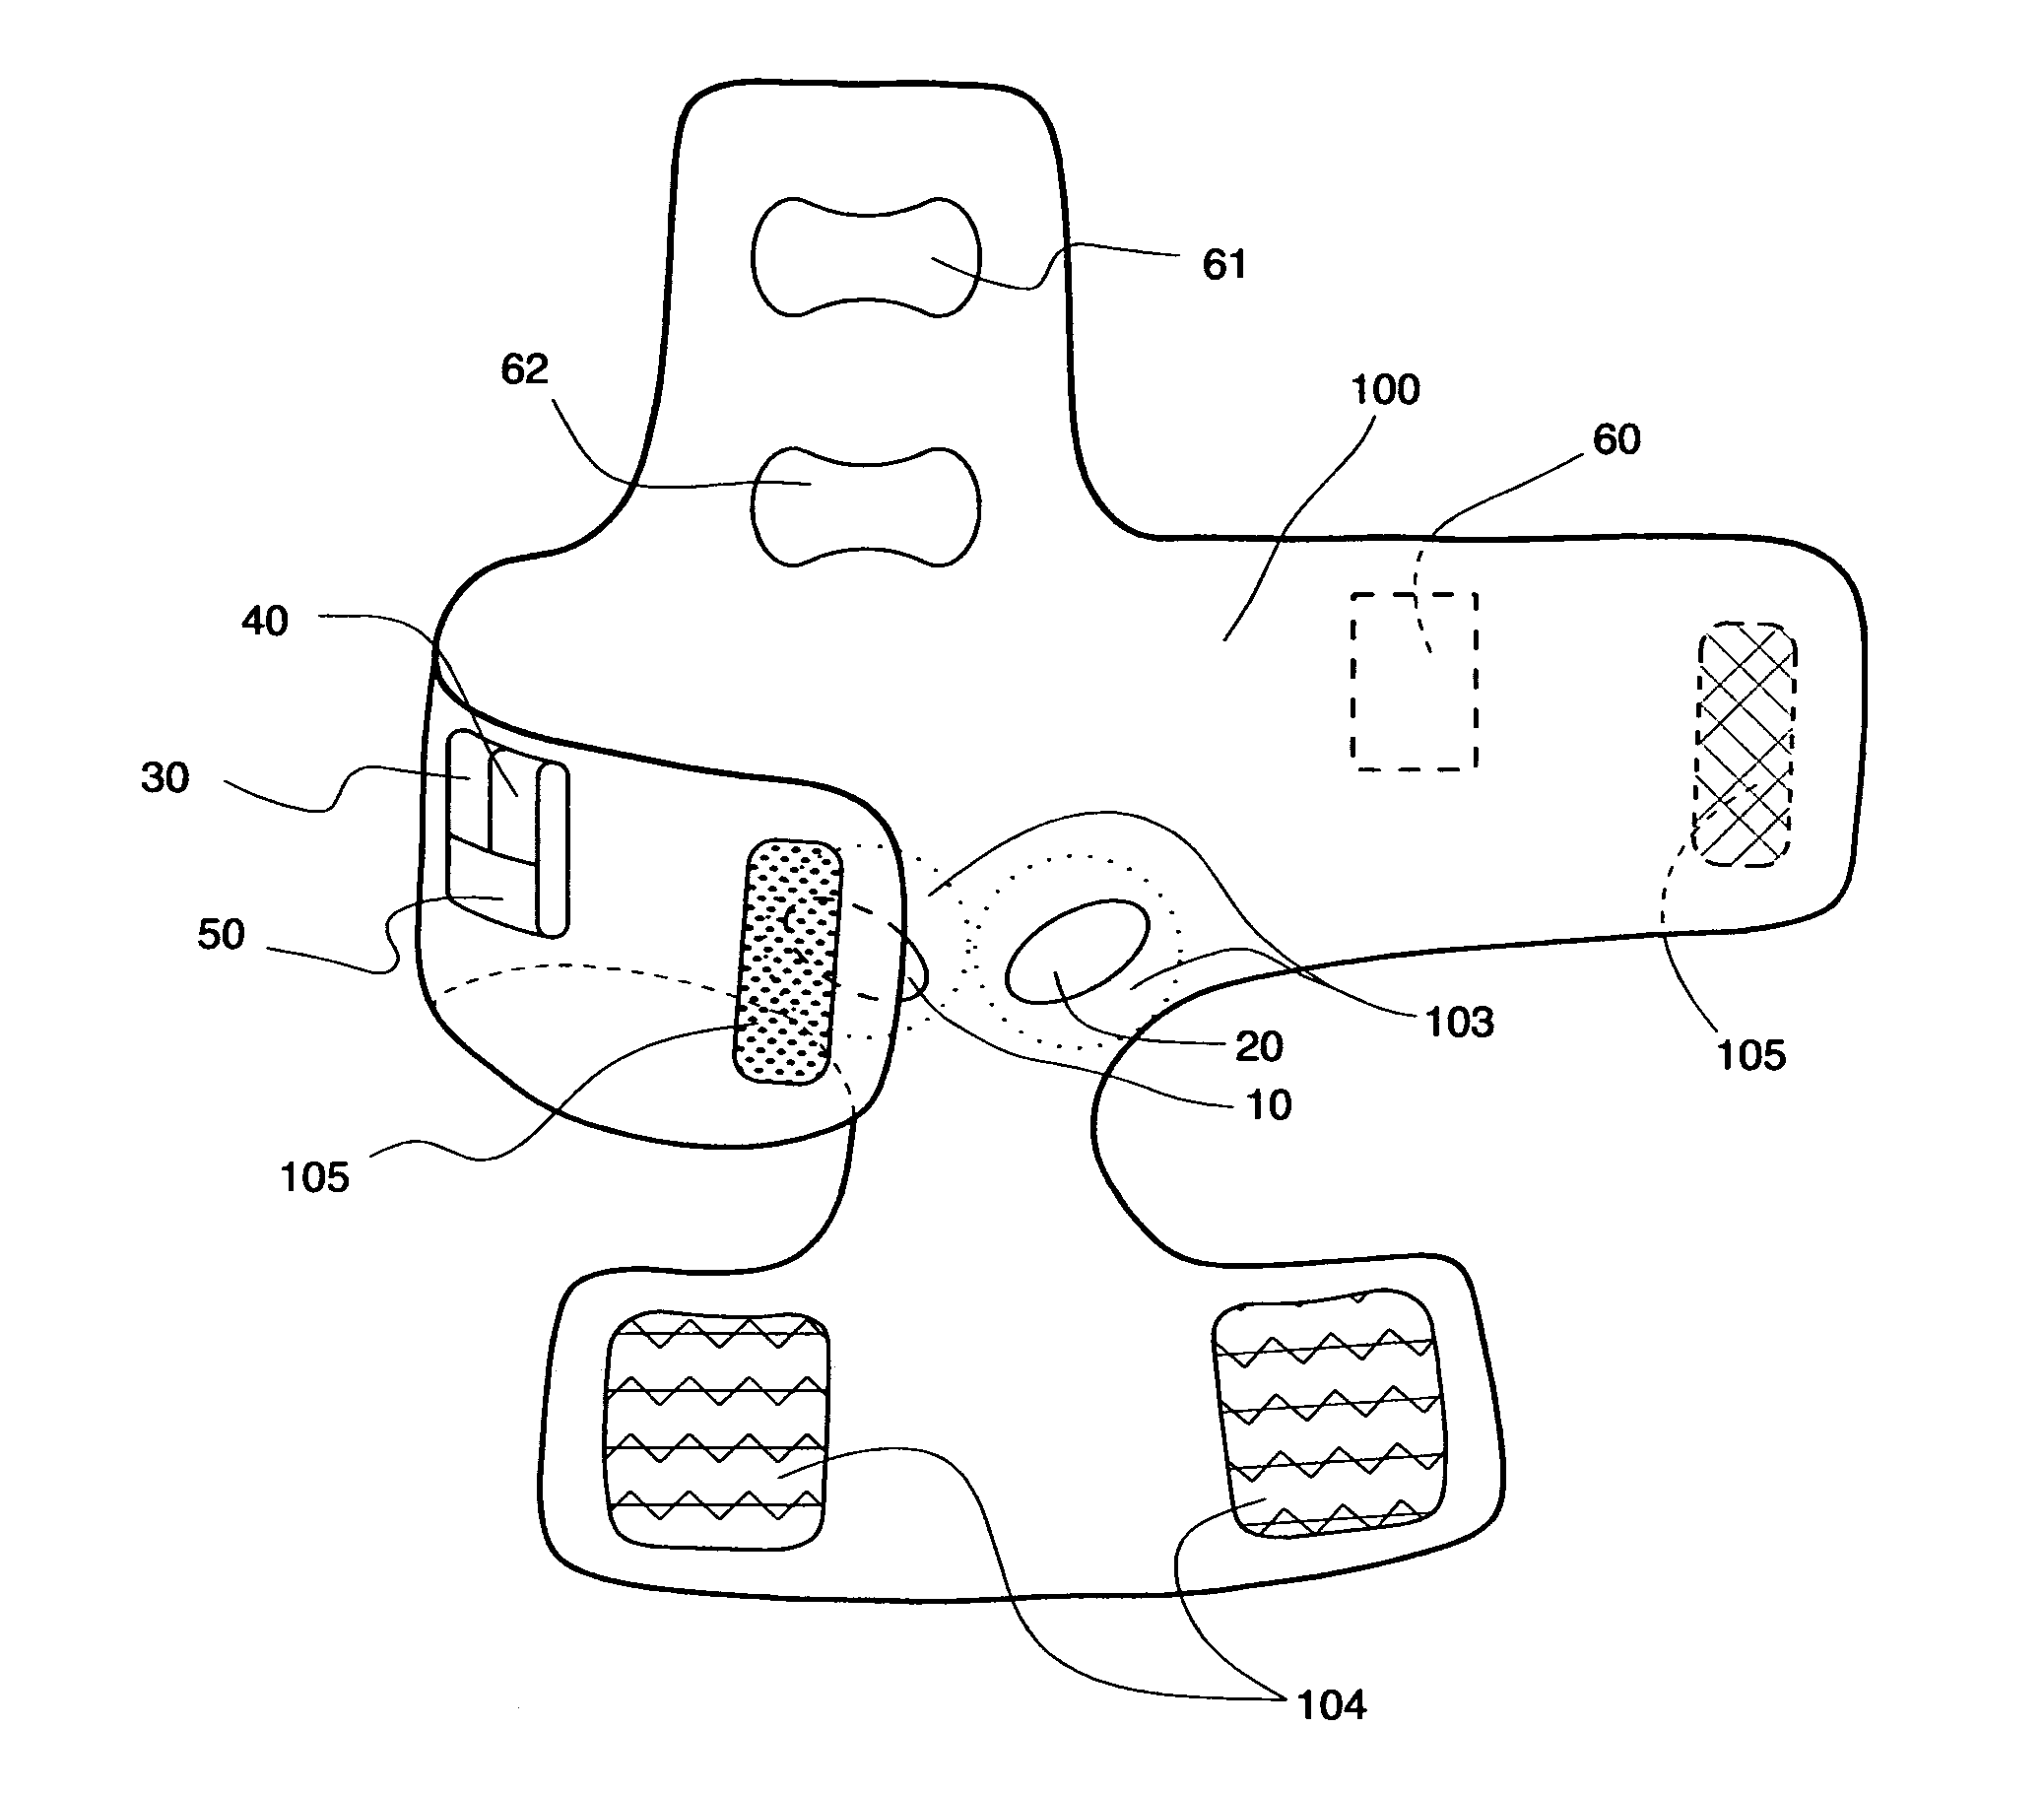 Apparatus and method for treating and preventing formation of pressure ulcers